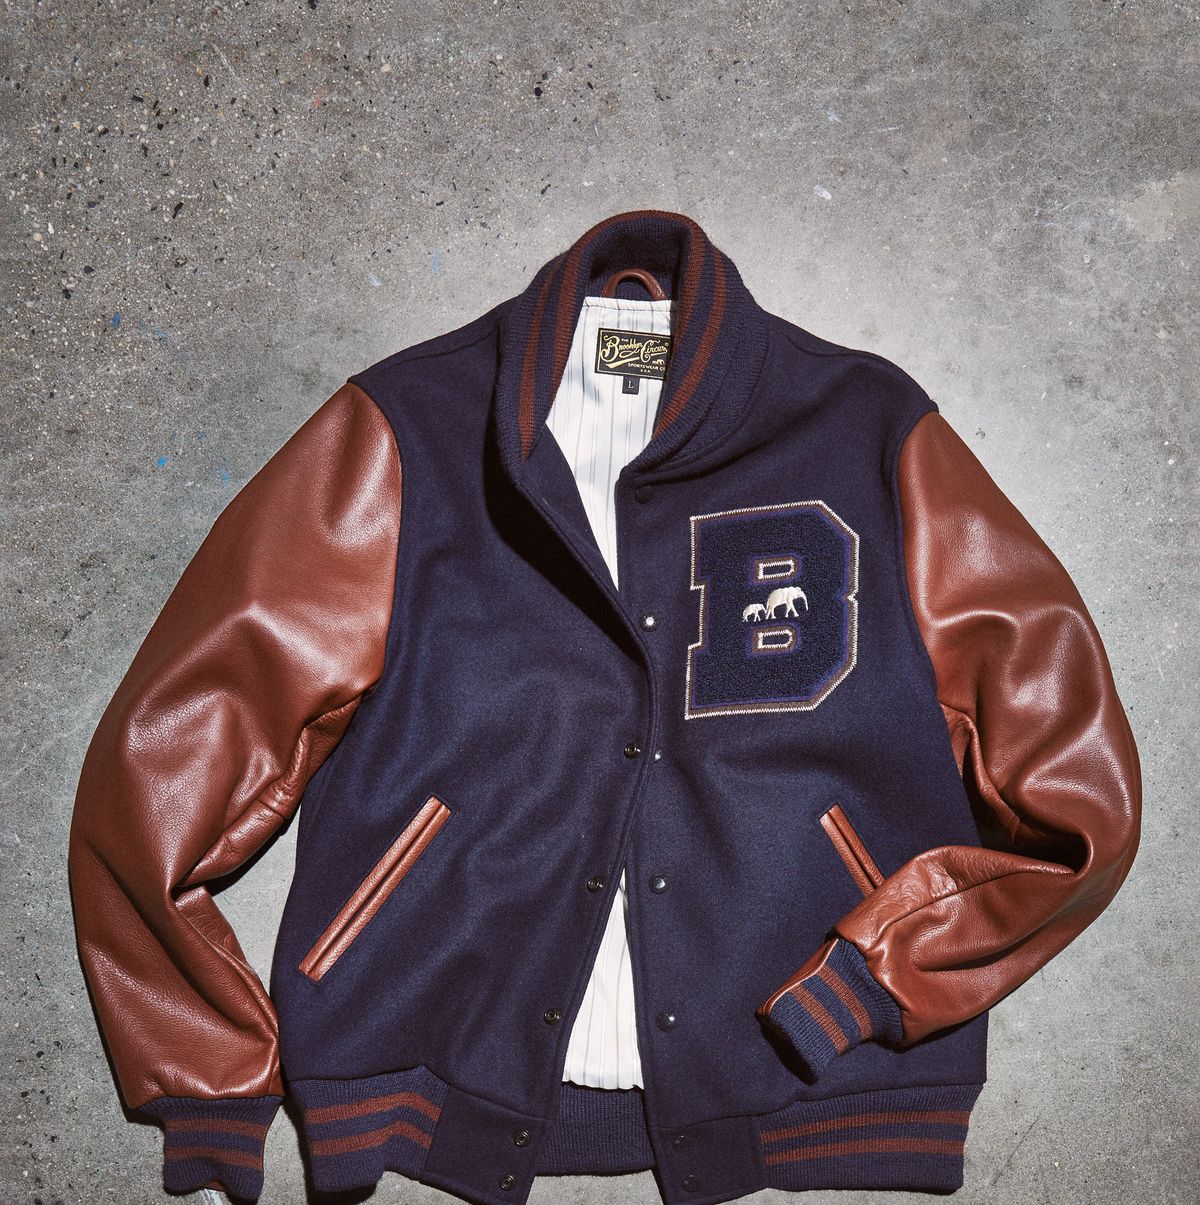 Varsity jacket outfit  Varsity jacket outfit, Jacket outfits, Leather pants